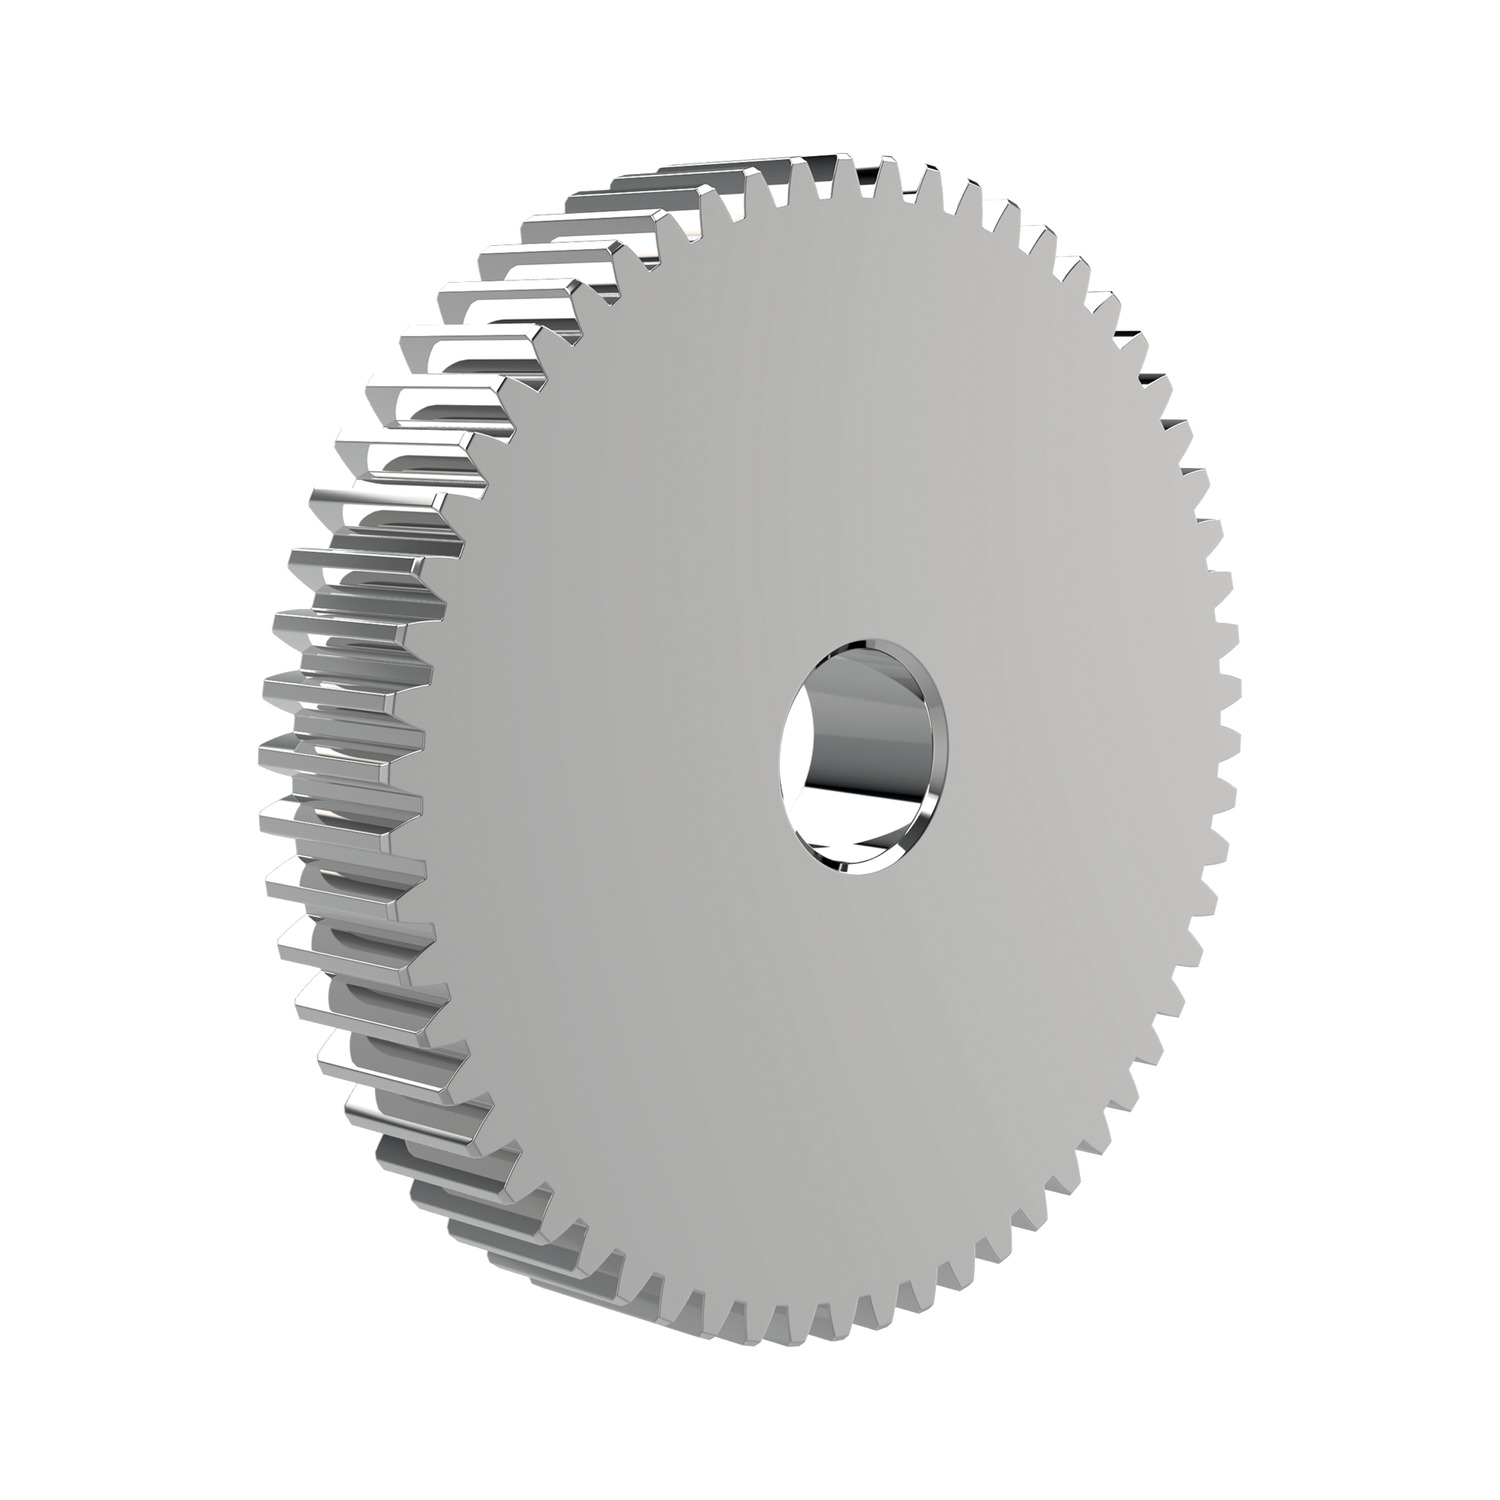 Spur Gears Module 1.25 Module 1.25 Spur Gear are in stock in carbon steel, with 8-120 teeth. Bored and boreless versions are available.